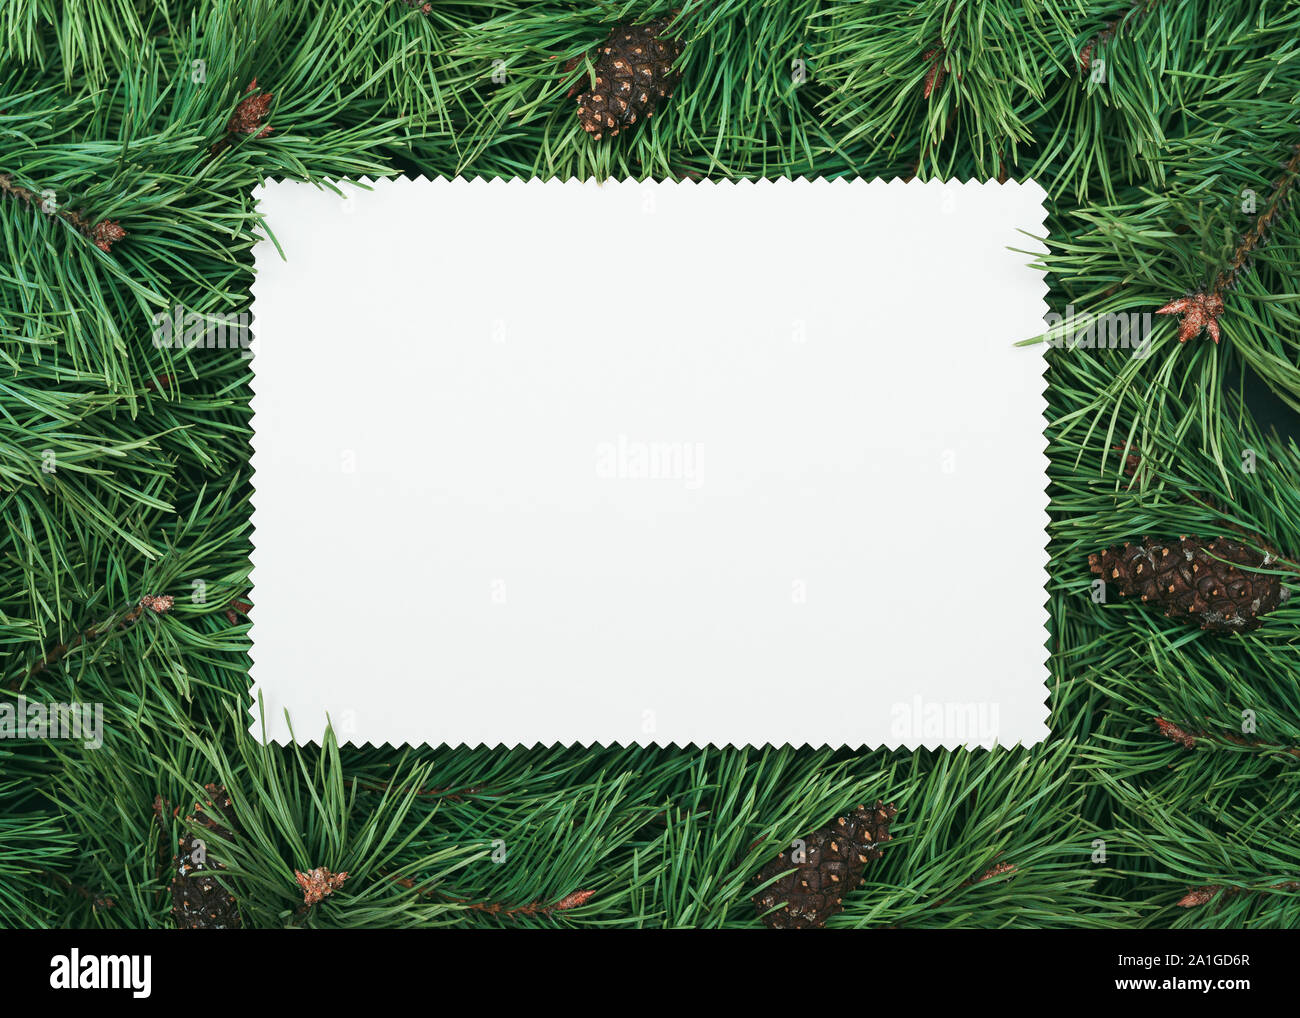 Pine branch frame with white note paper sheet fo text. Christmas and New Year background Stock Photo